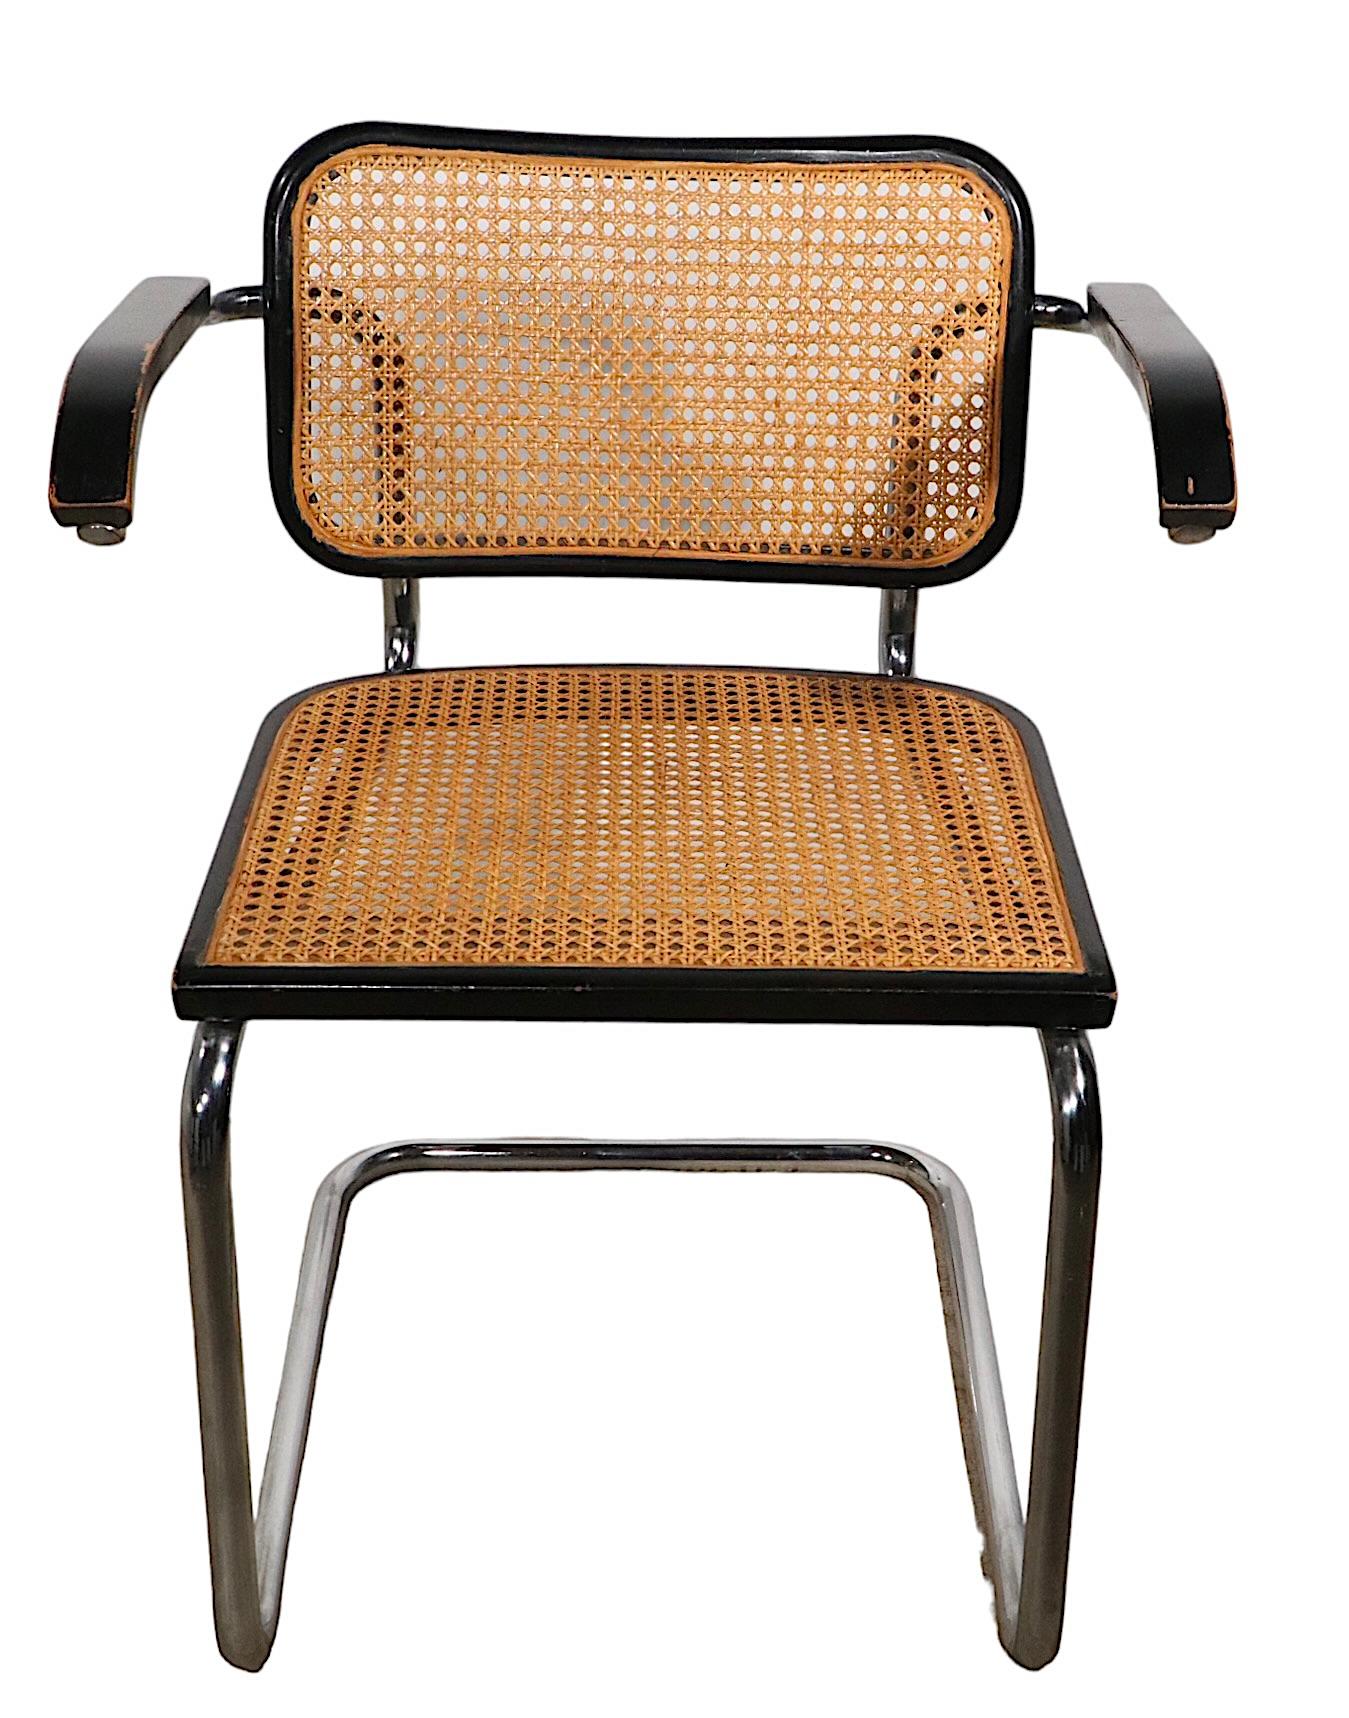 International Style Chrome and Black Cesca Chair Designed by Marcel Breuer Made in Italy circa 1970s